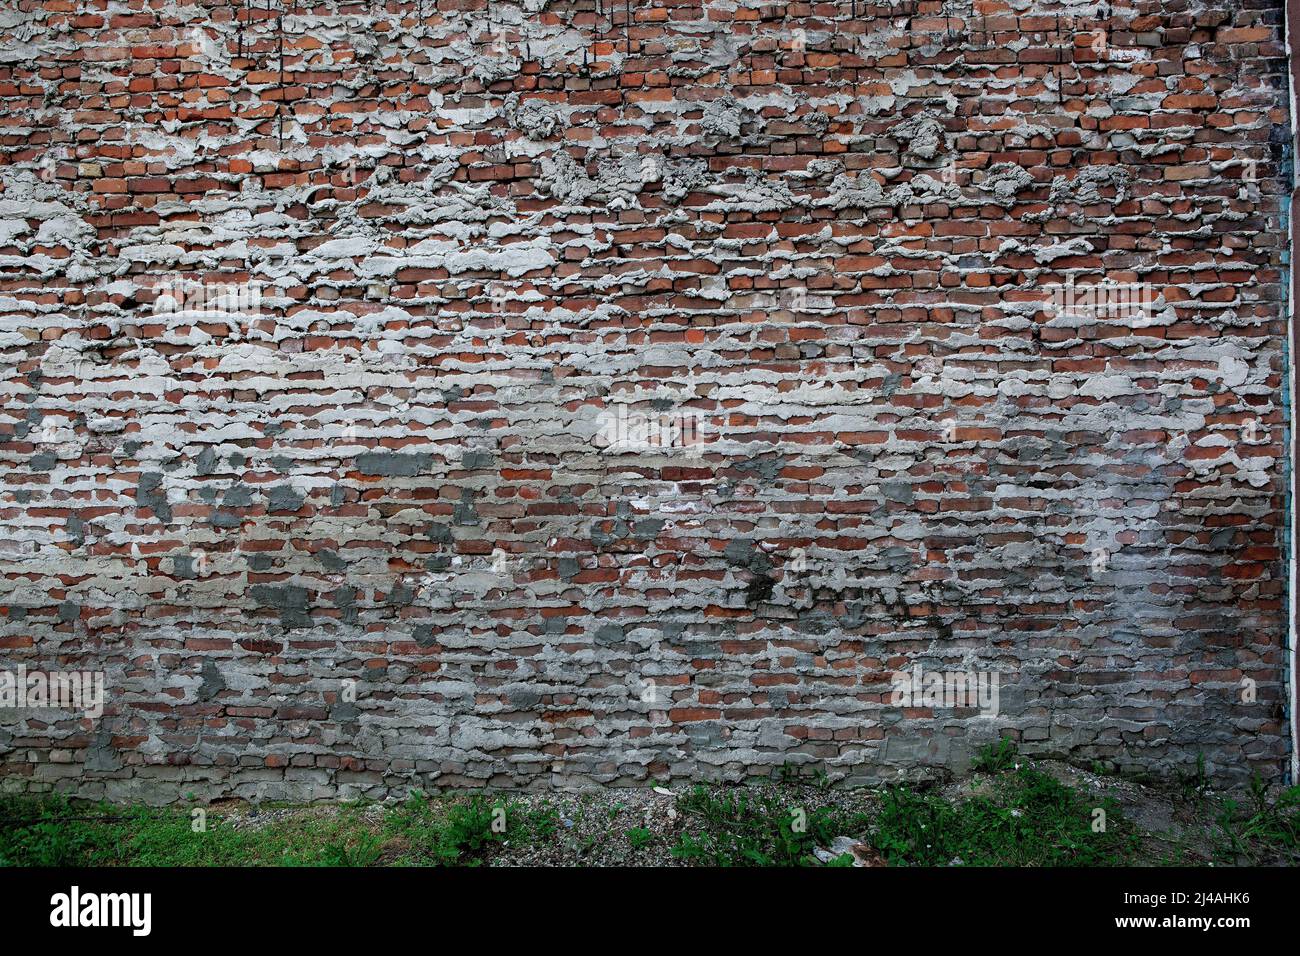 Red brick wall with mortar and cement seepage suitable for wallapers backgrounds or compsite creations. Stock Photo